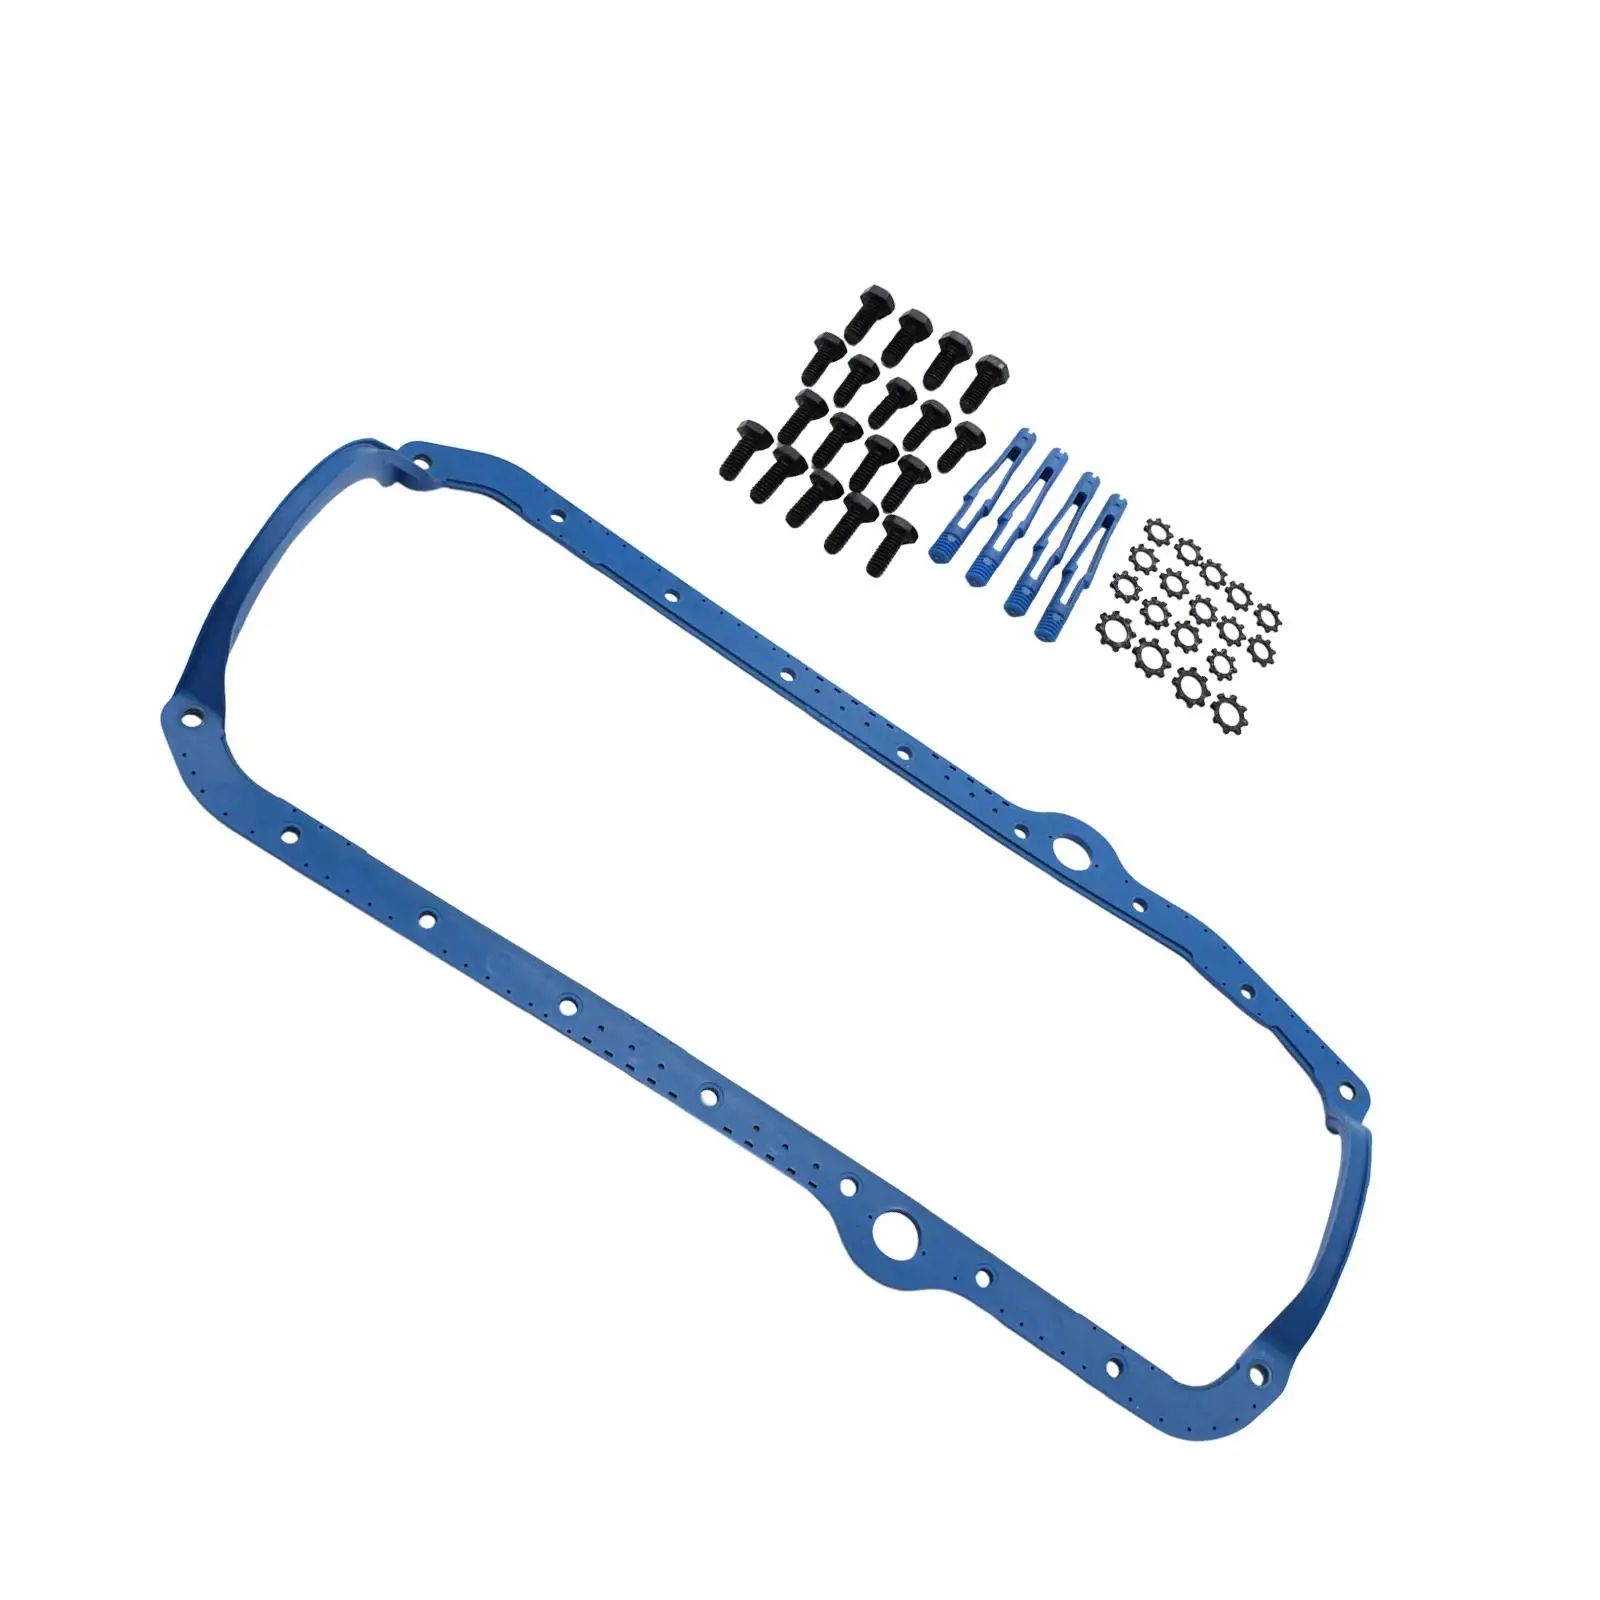 OS34510T Engine Gasket Accessory Premium Replaces Durable Oil Pan Gasket Set Spare Parts for Chevy Small Block 1975-1985